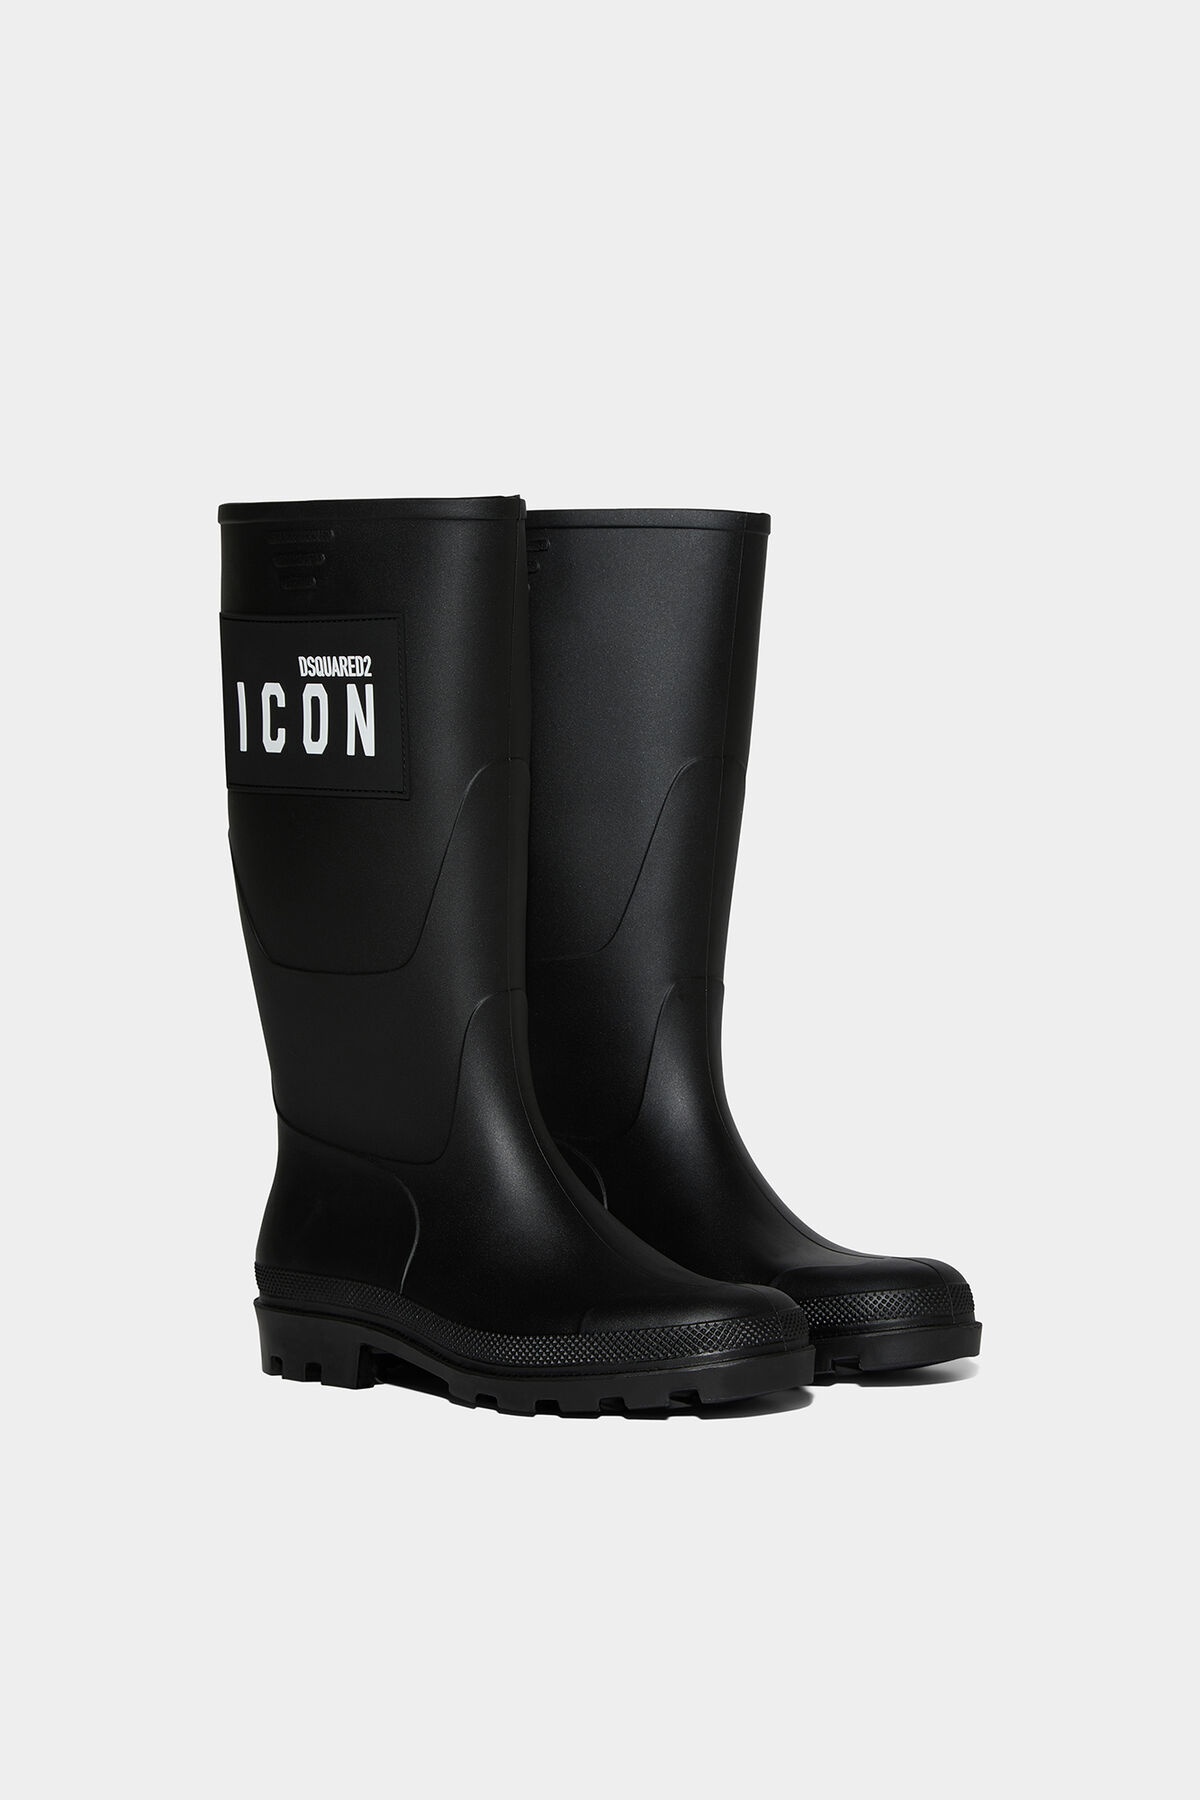 BE ICON BOOTS - 3